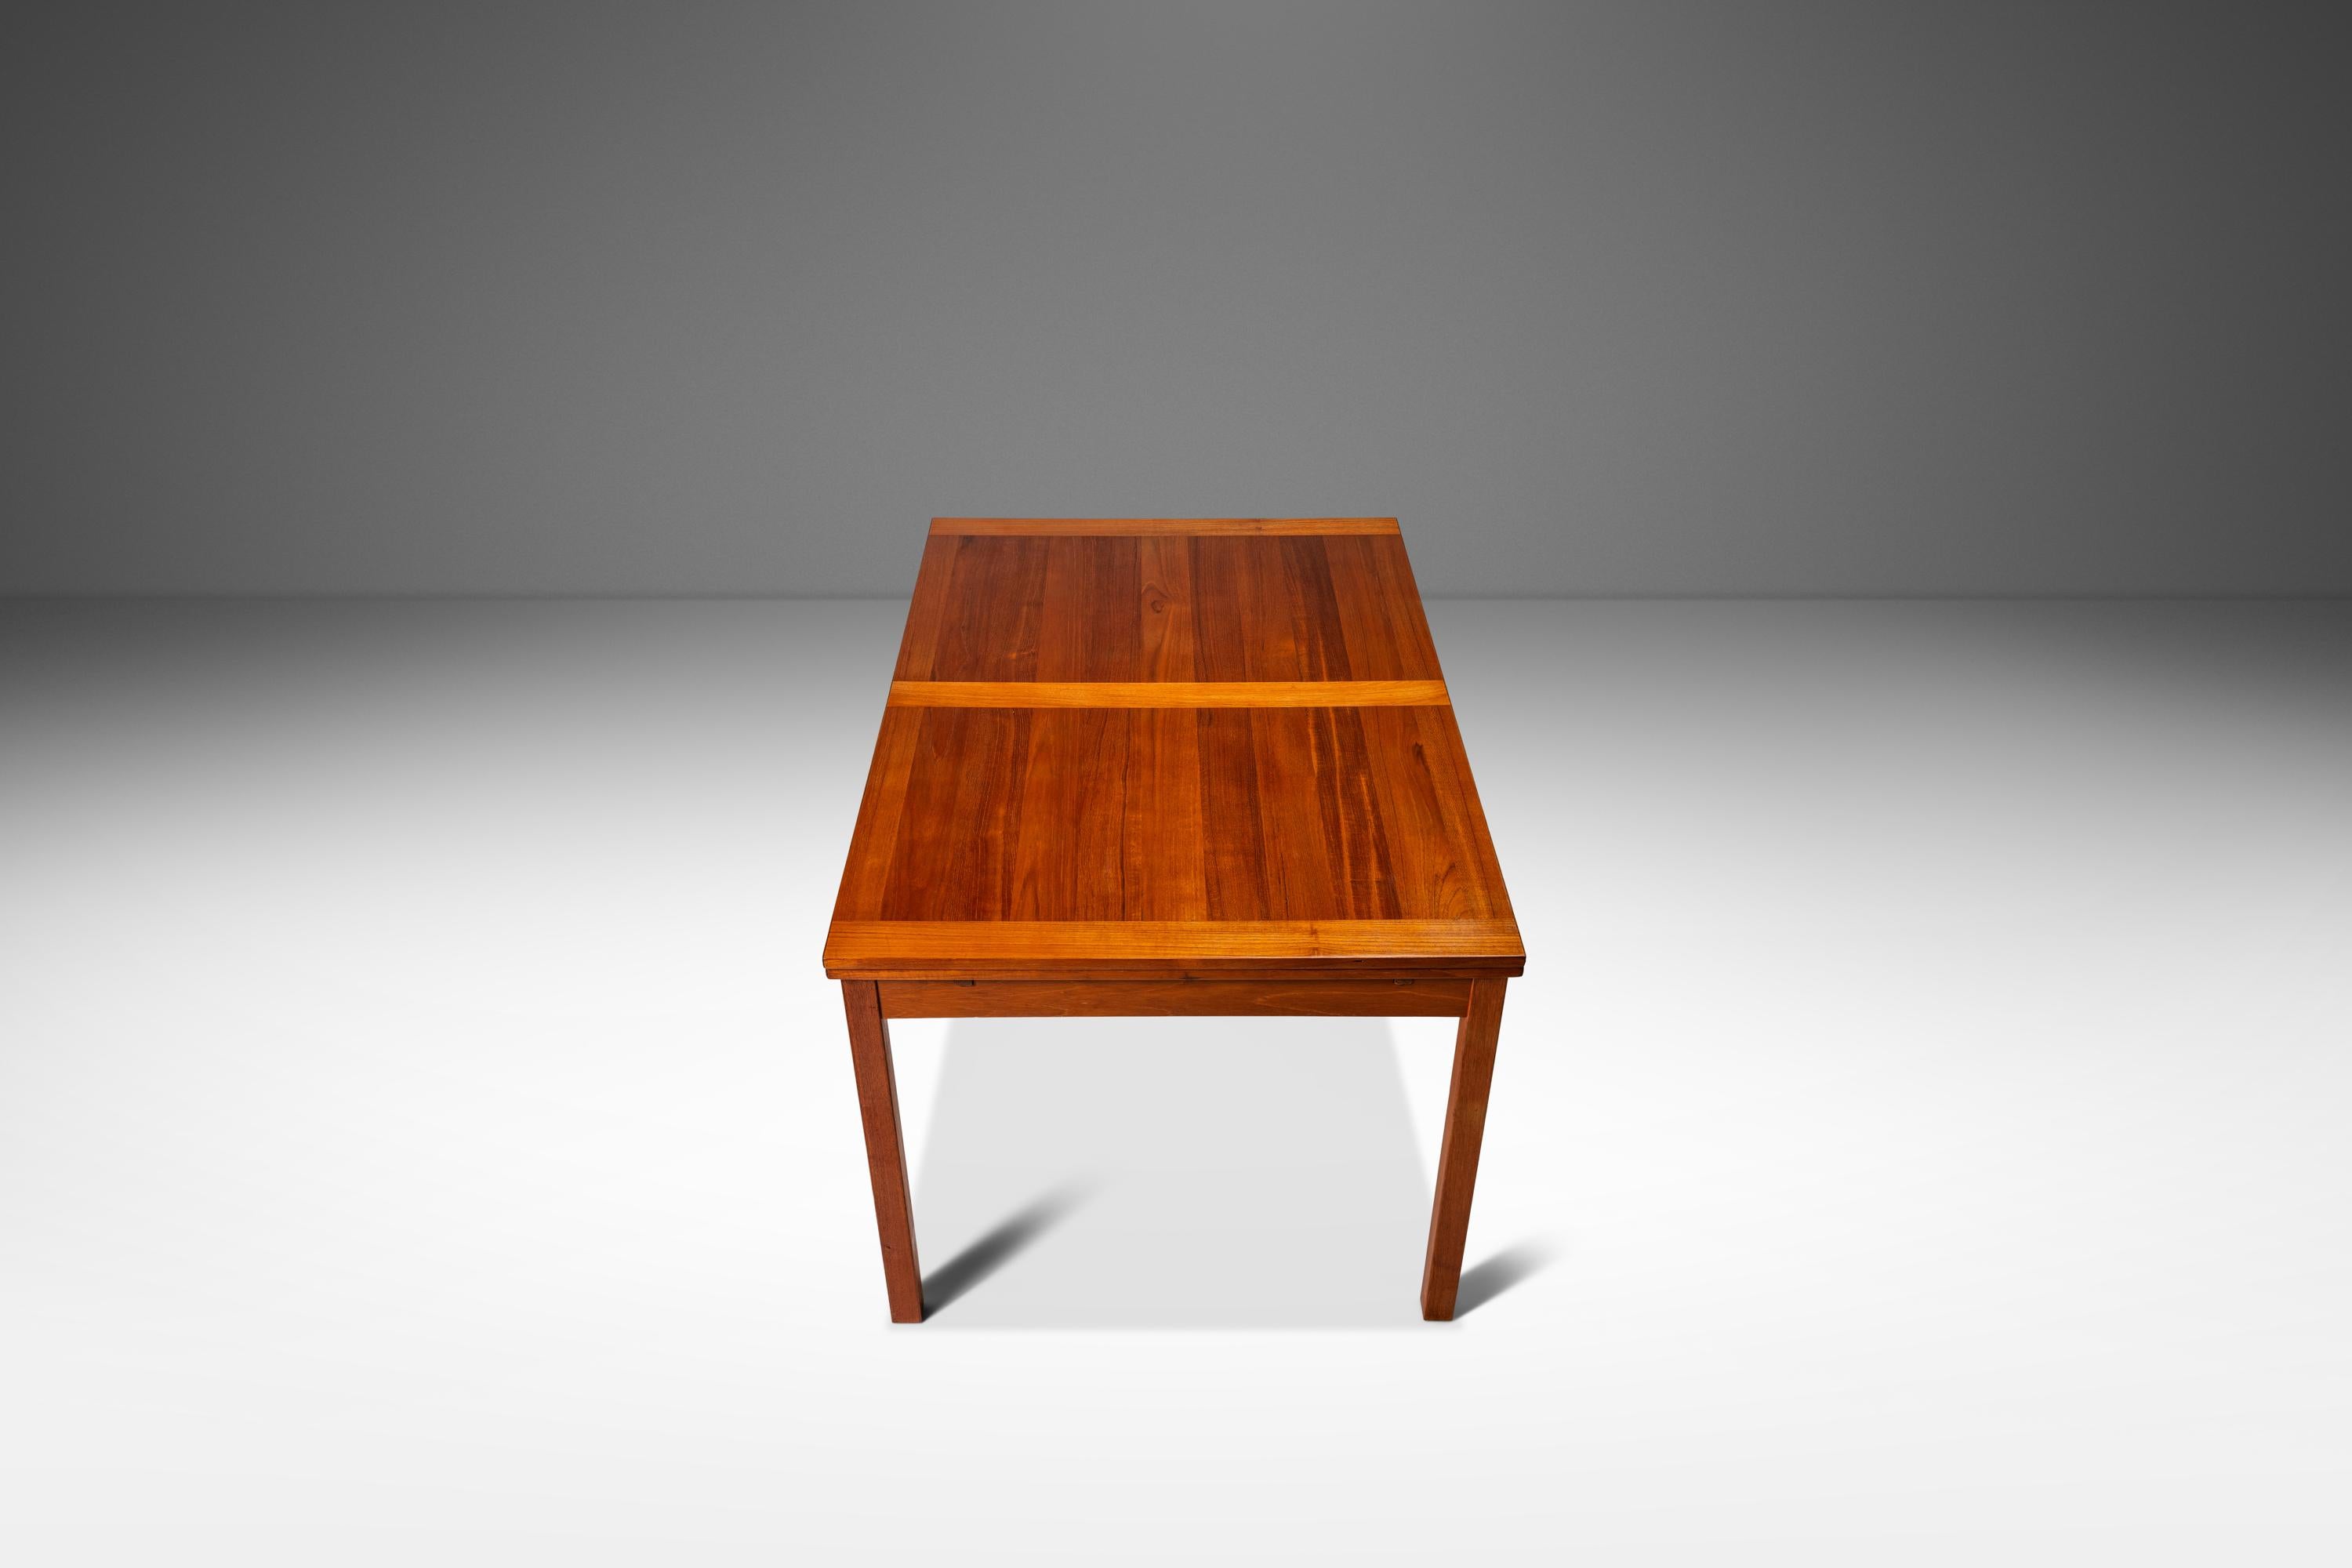 Mid-Century Modern Danish Teak Extension Dining Table with Stow-in-Table Leaves, Denmark, c. 1970s